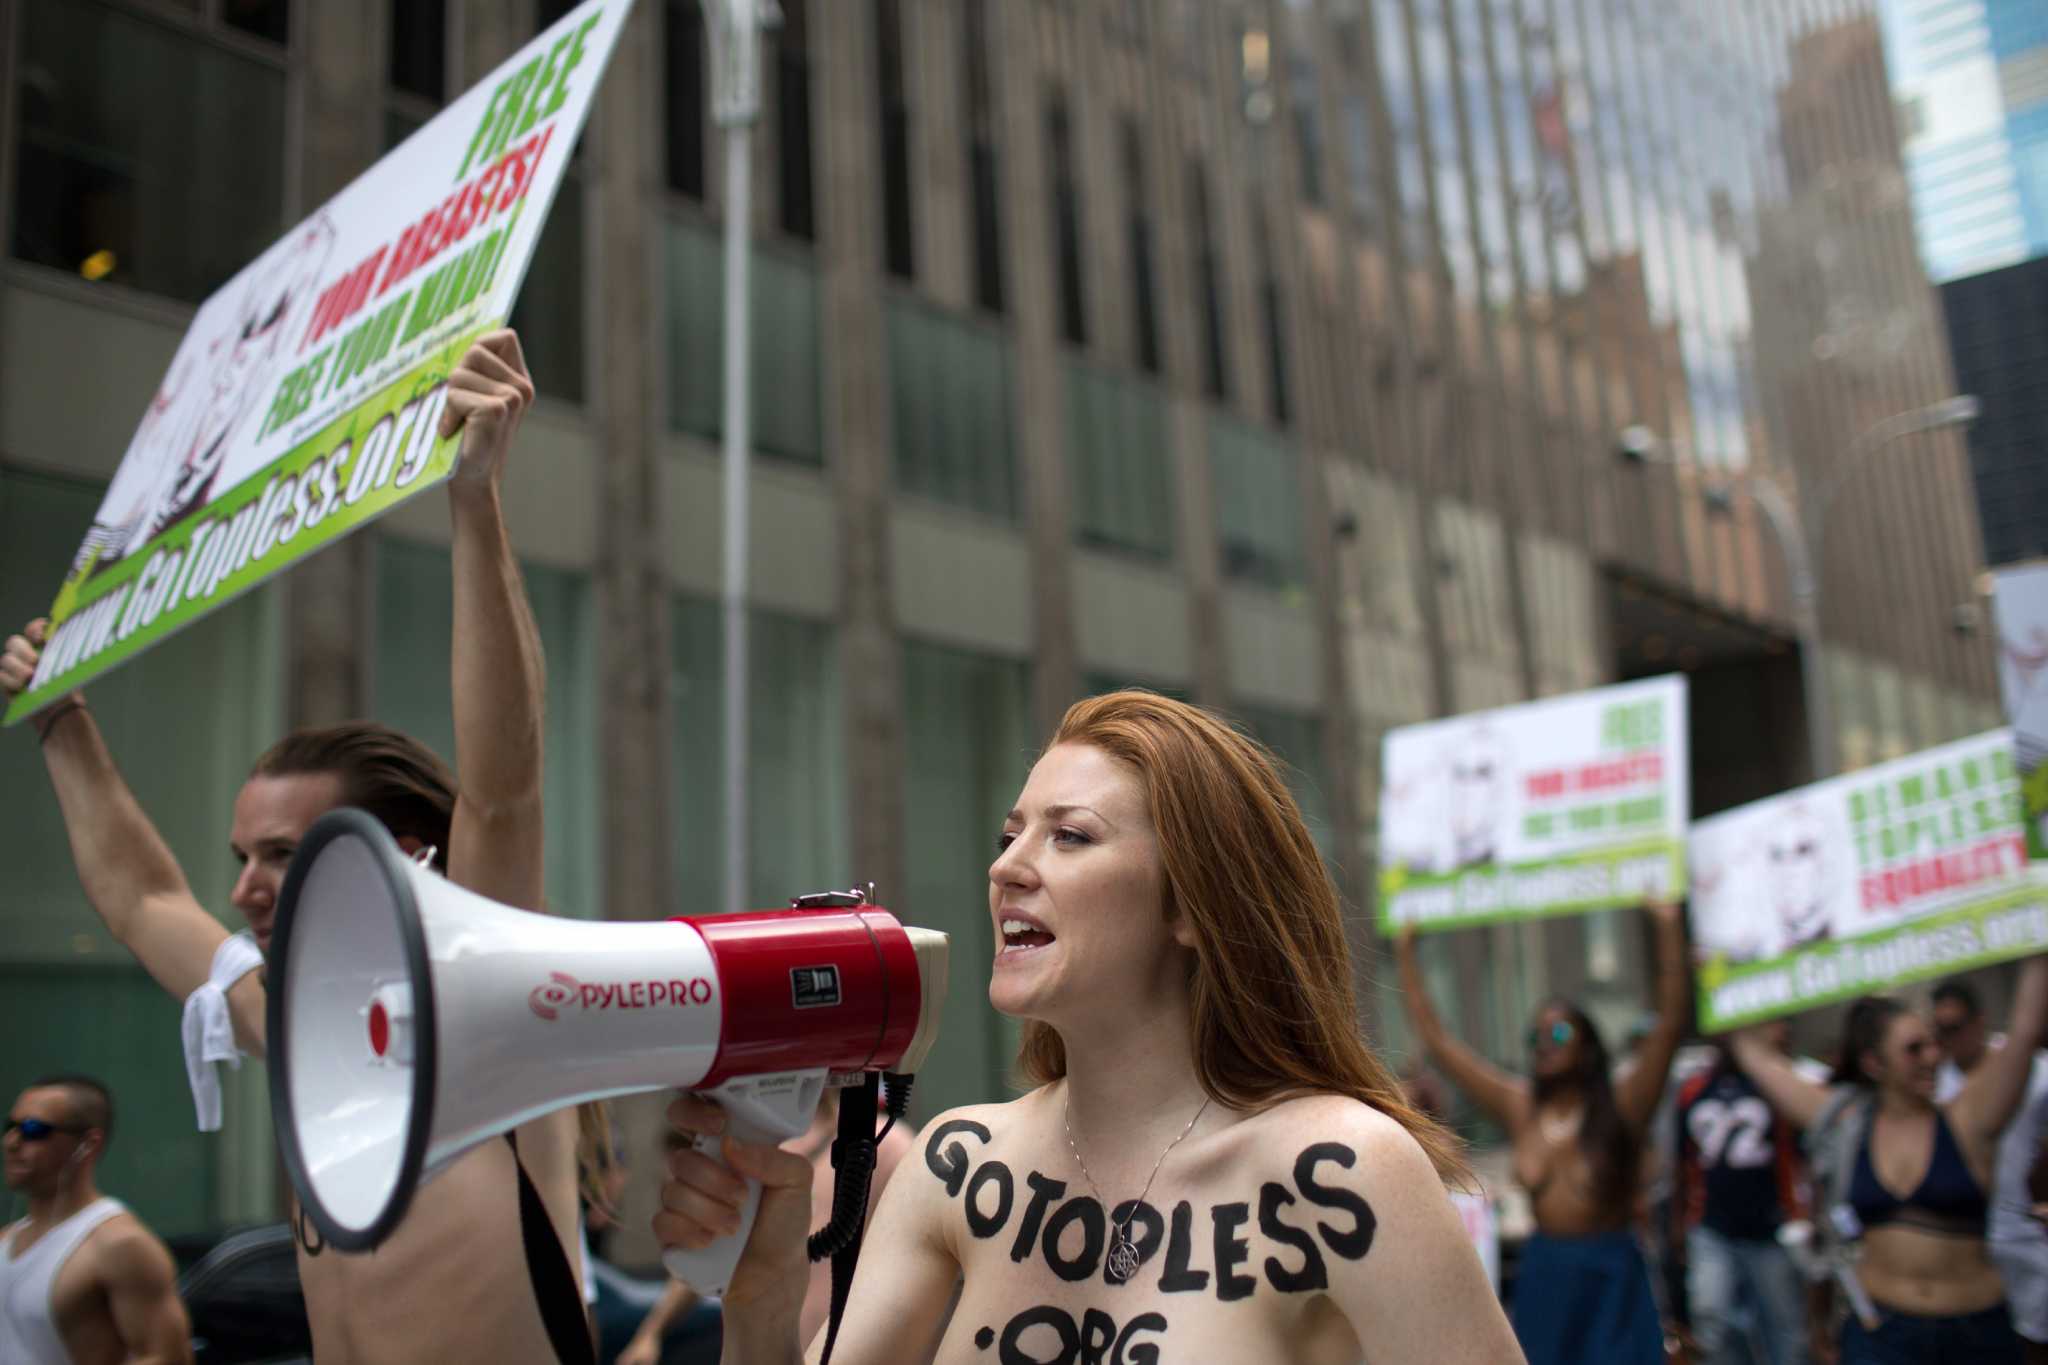 NY stages topless parade with 60 cities worldwide